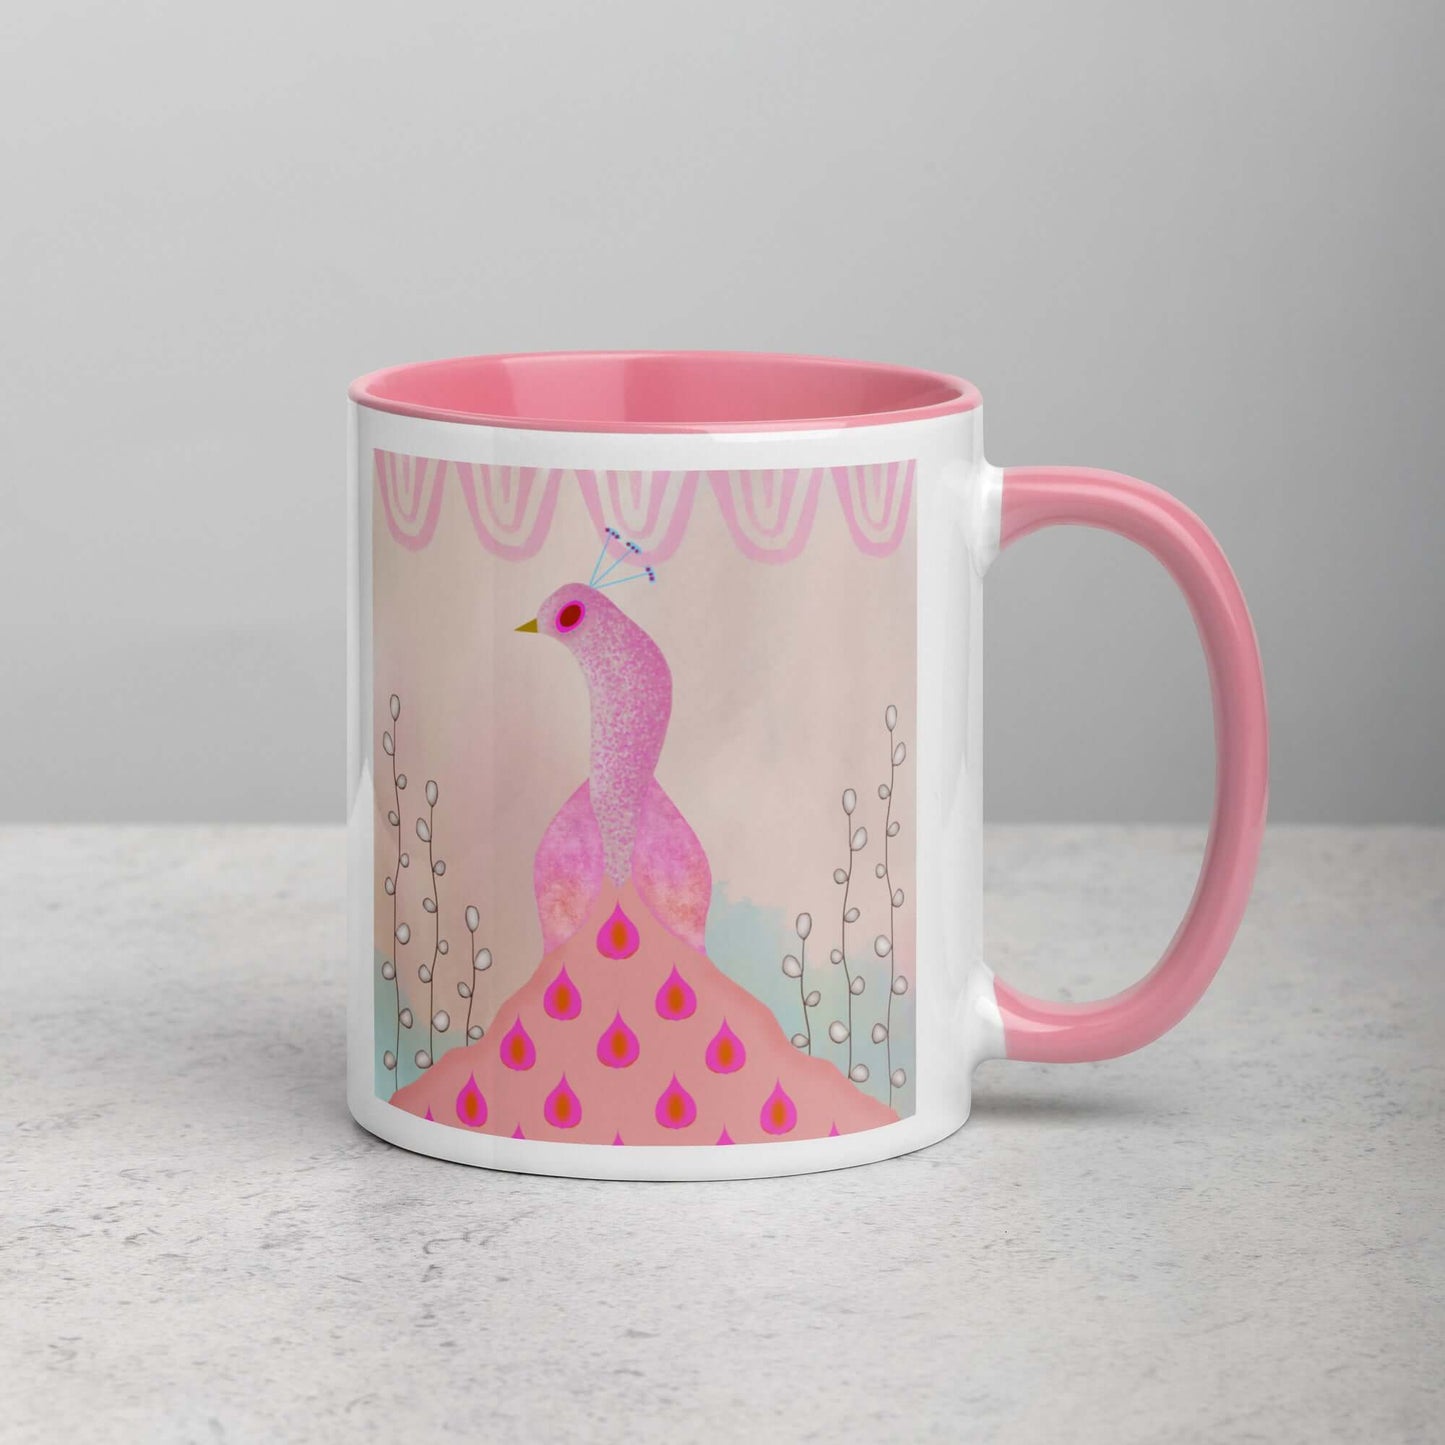 Light Pink Peacock on Beige Background with Willow Buds “Pink Peacock” Mug with Light Pink Color Inside Right Handed Front View